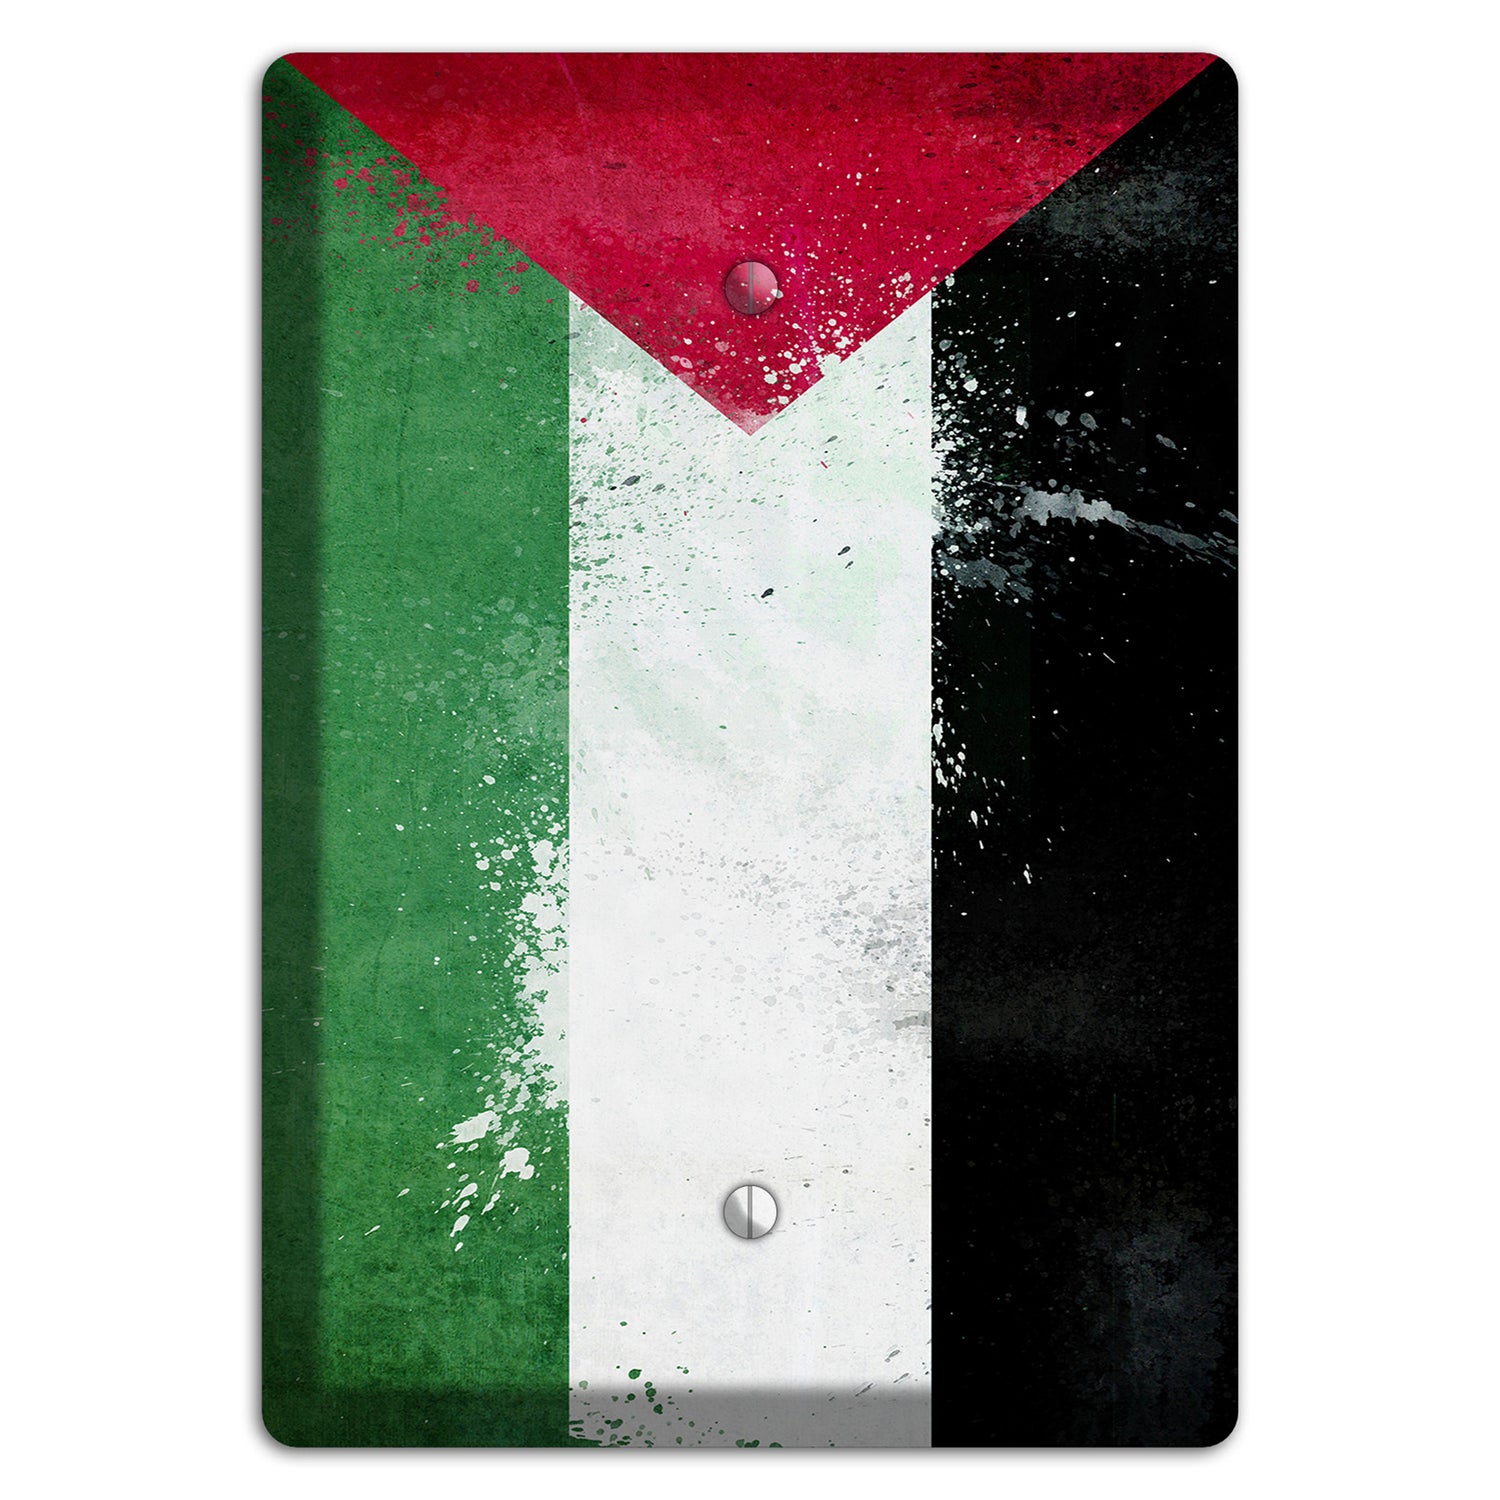 Palestine Cover Plates Blank Wallplate